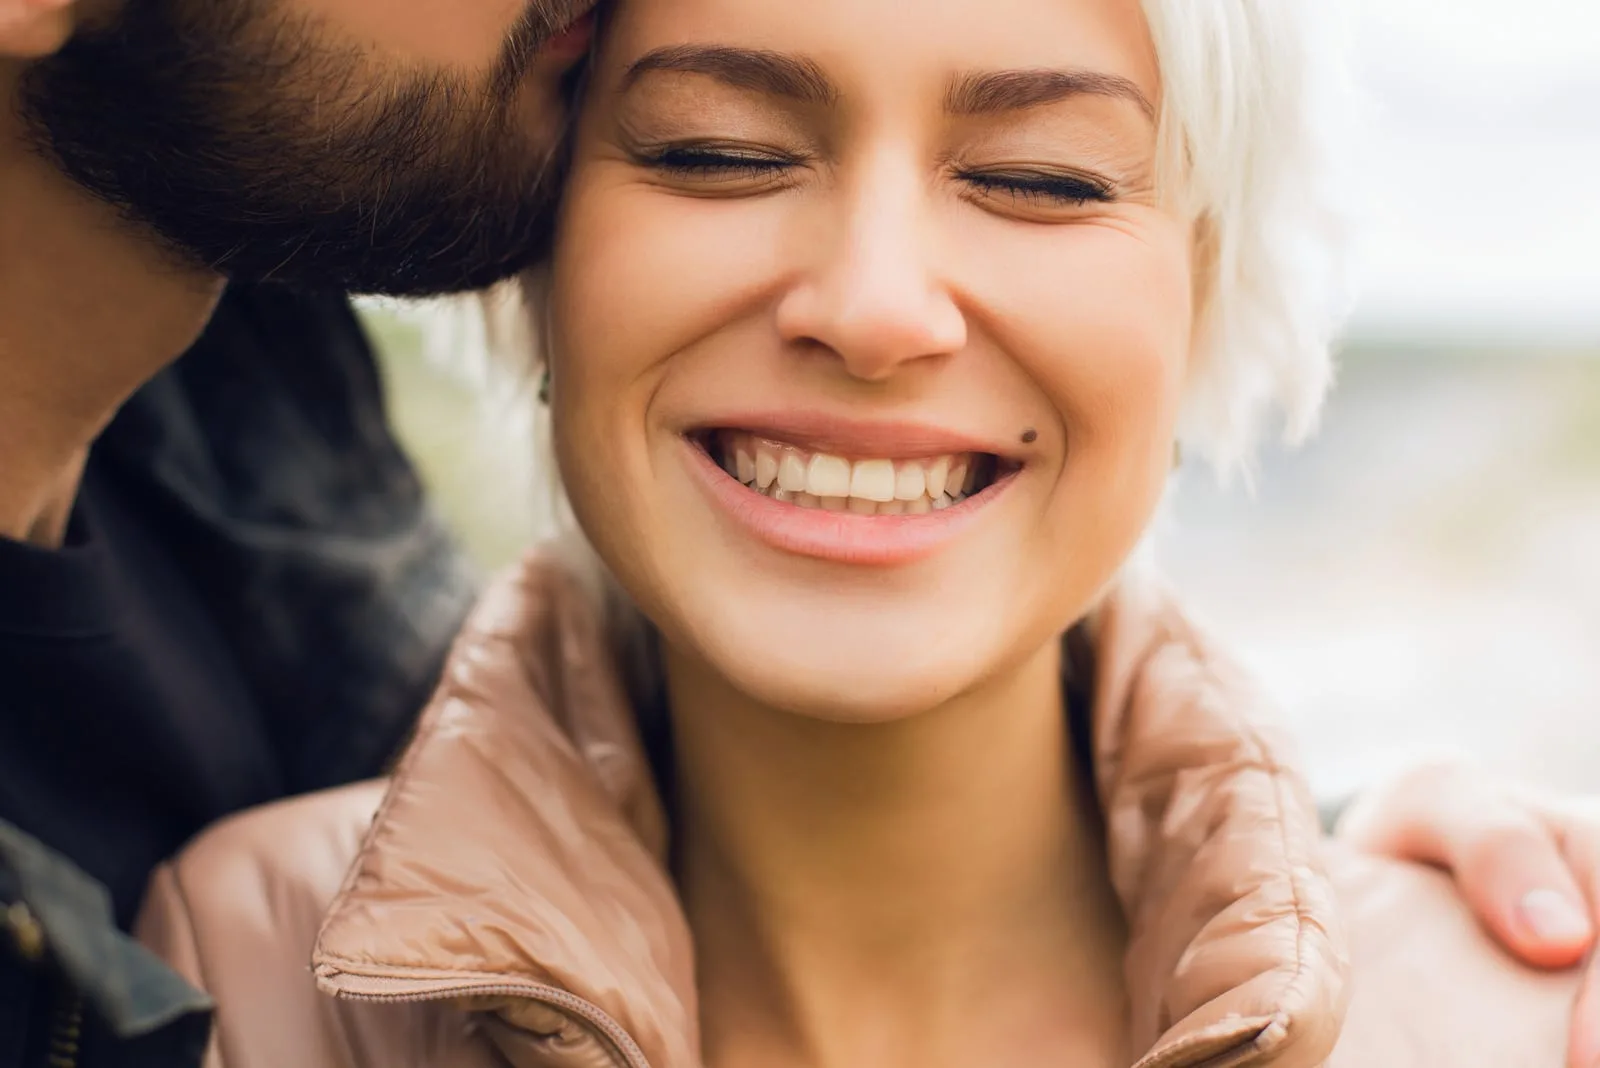 a bearded man kisses a smiling woman on the cheek